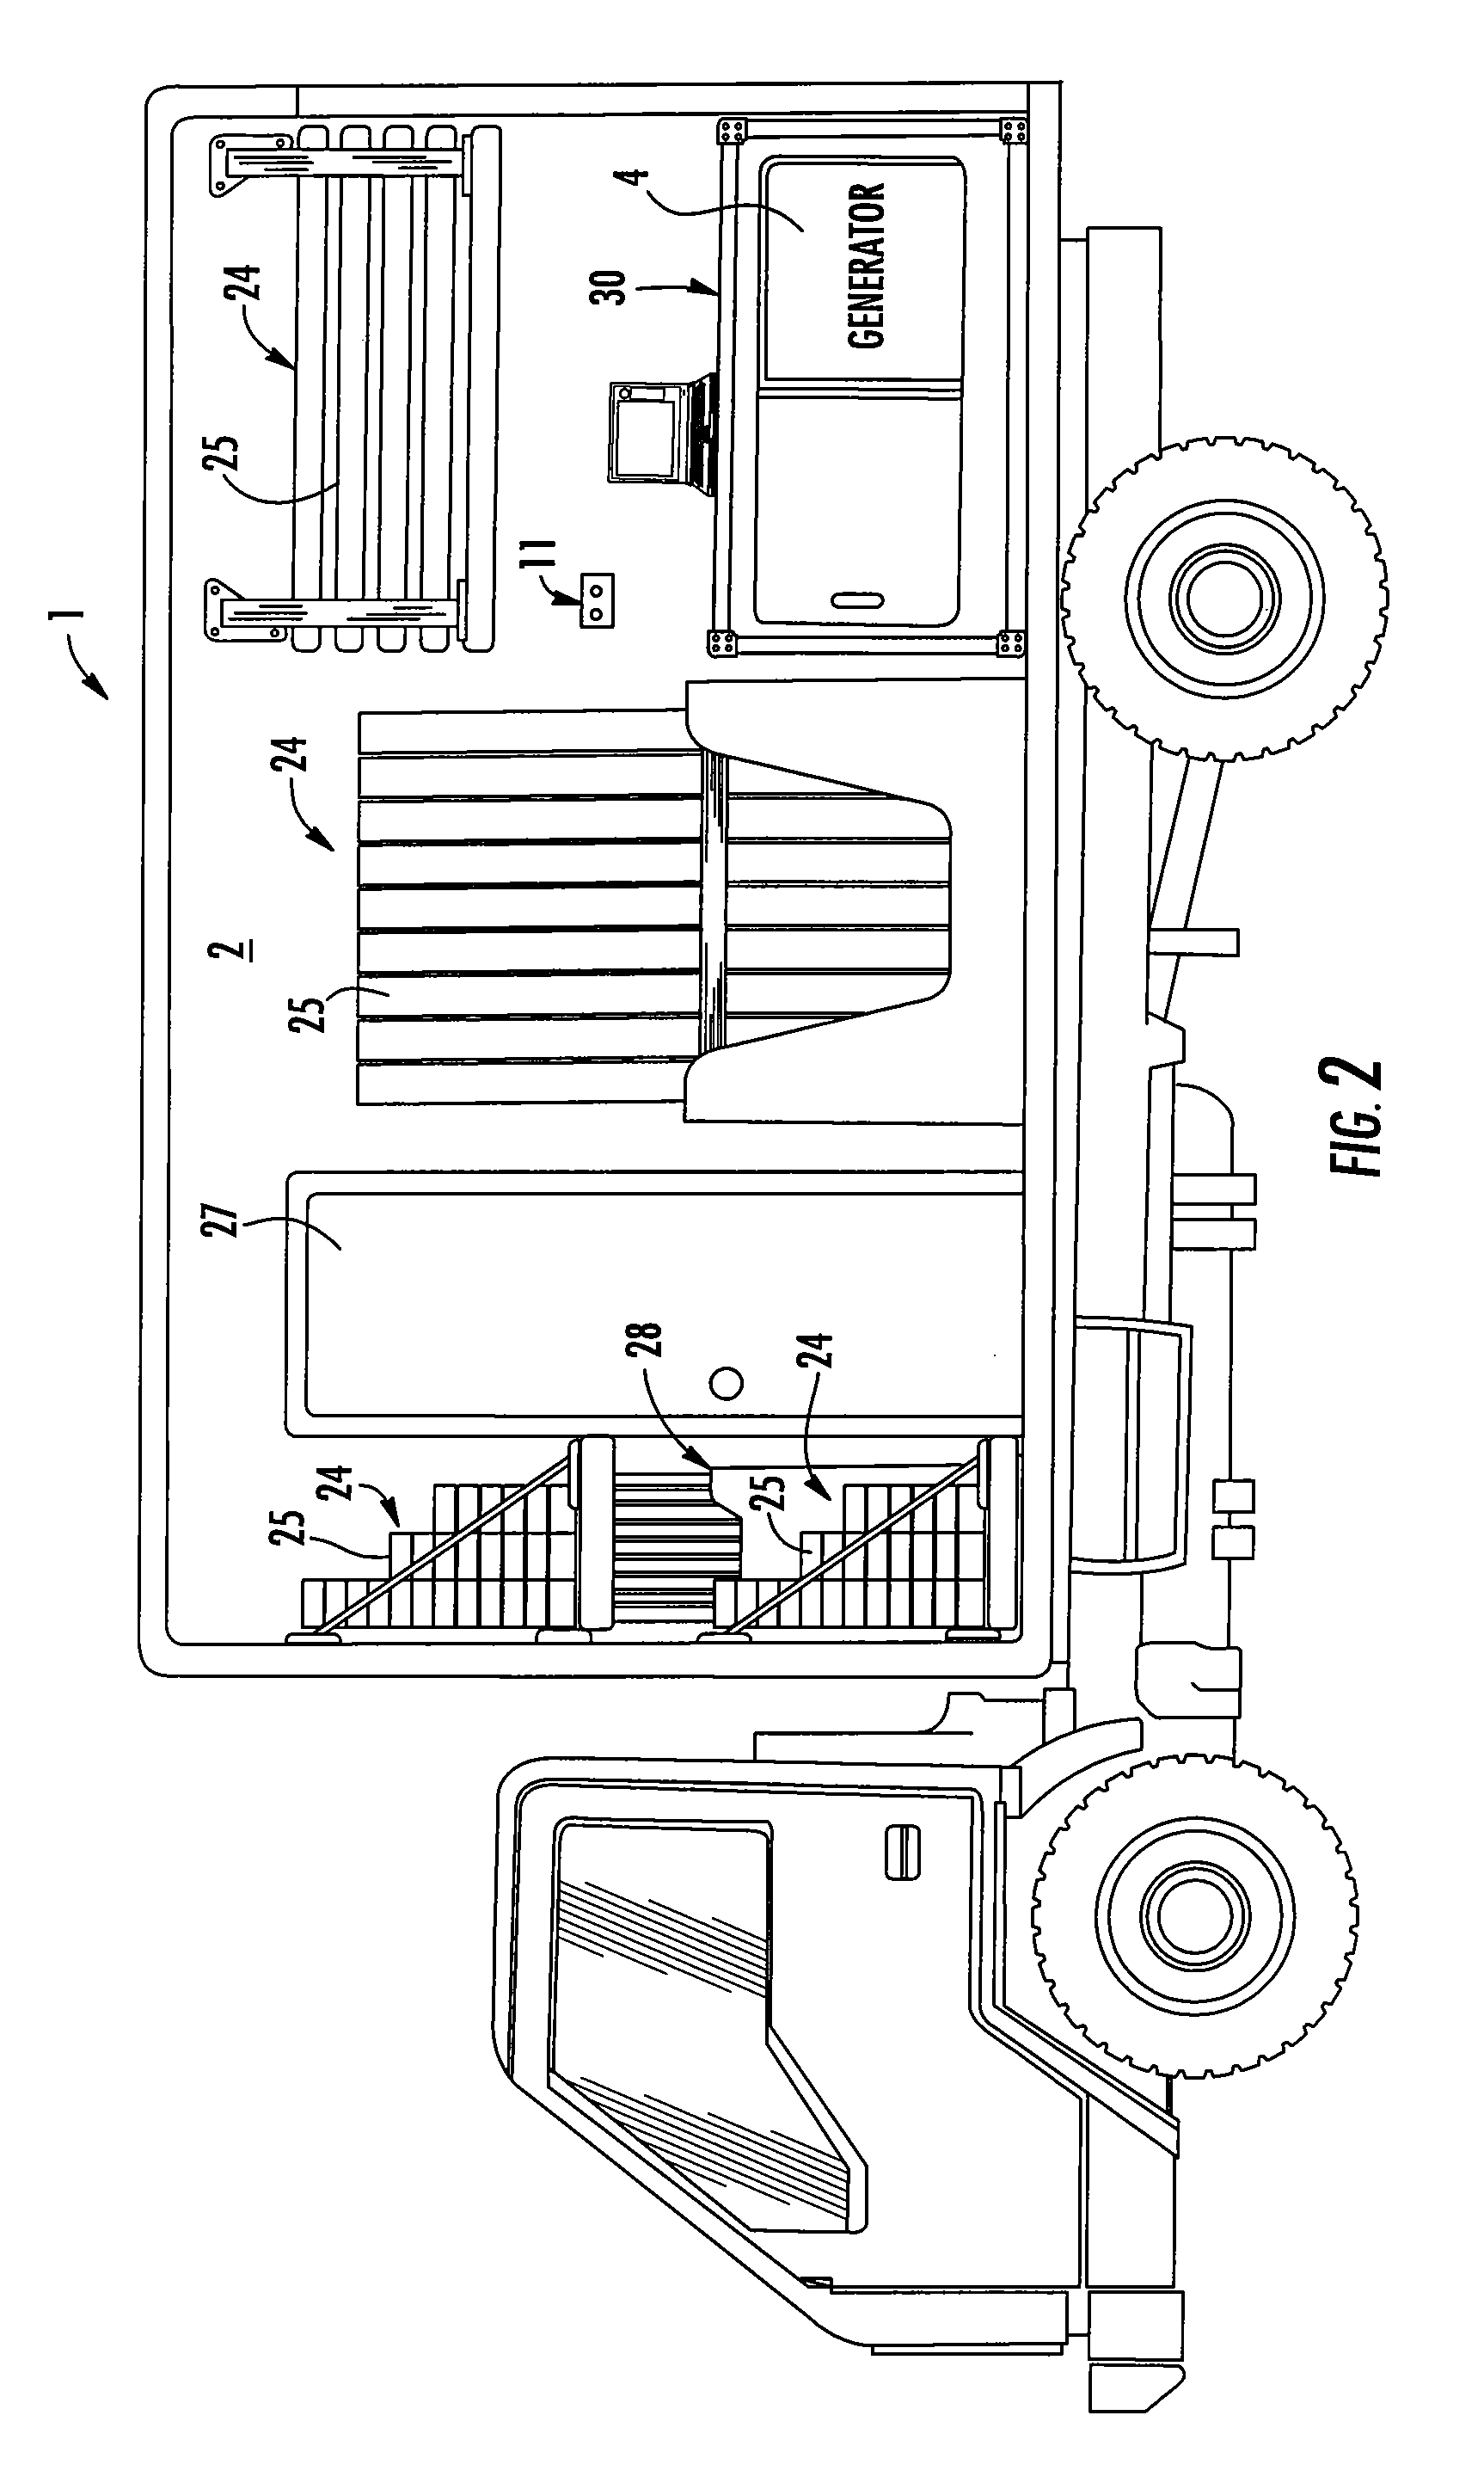 Method and apparatus for mobile blind installation